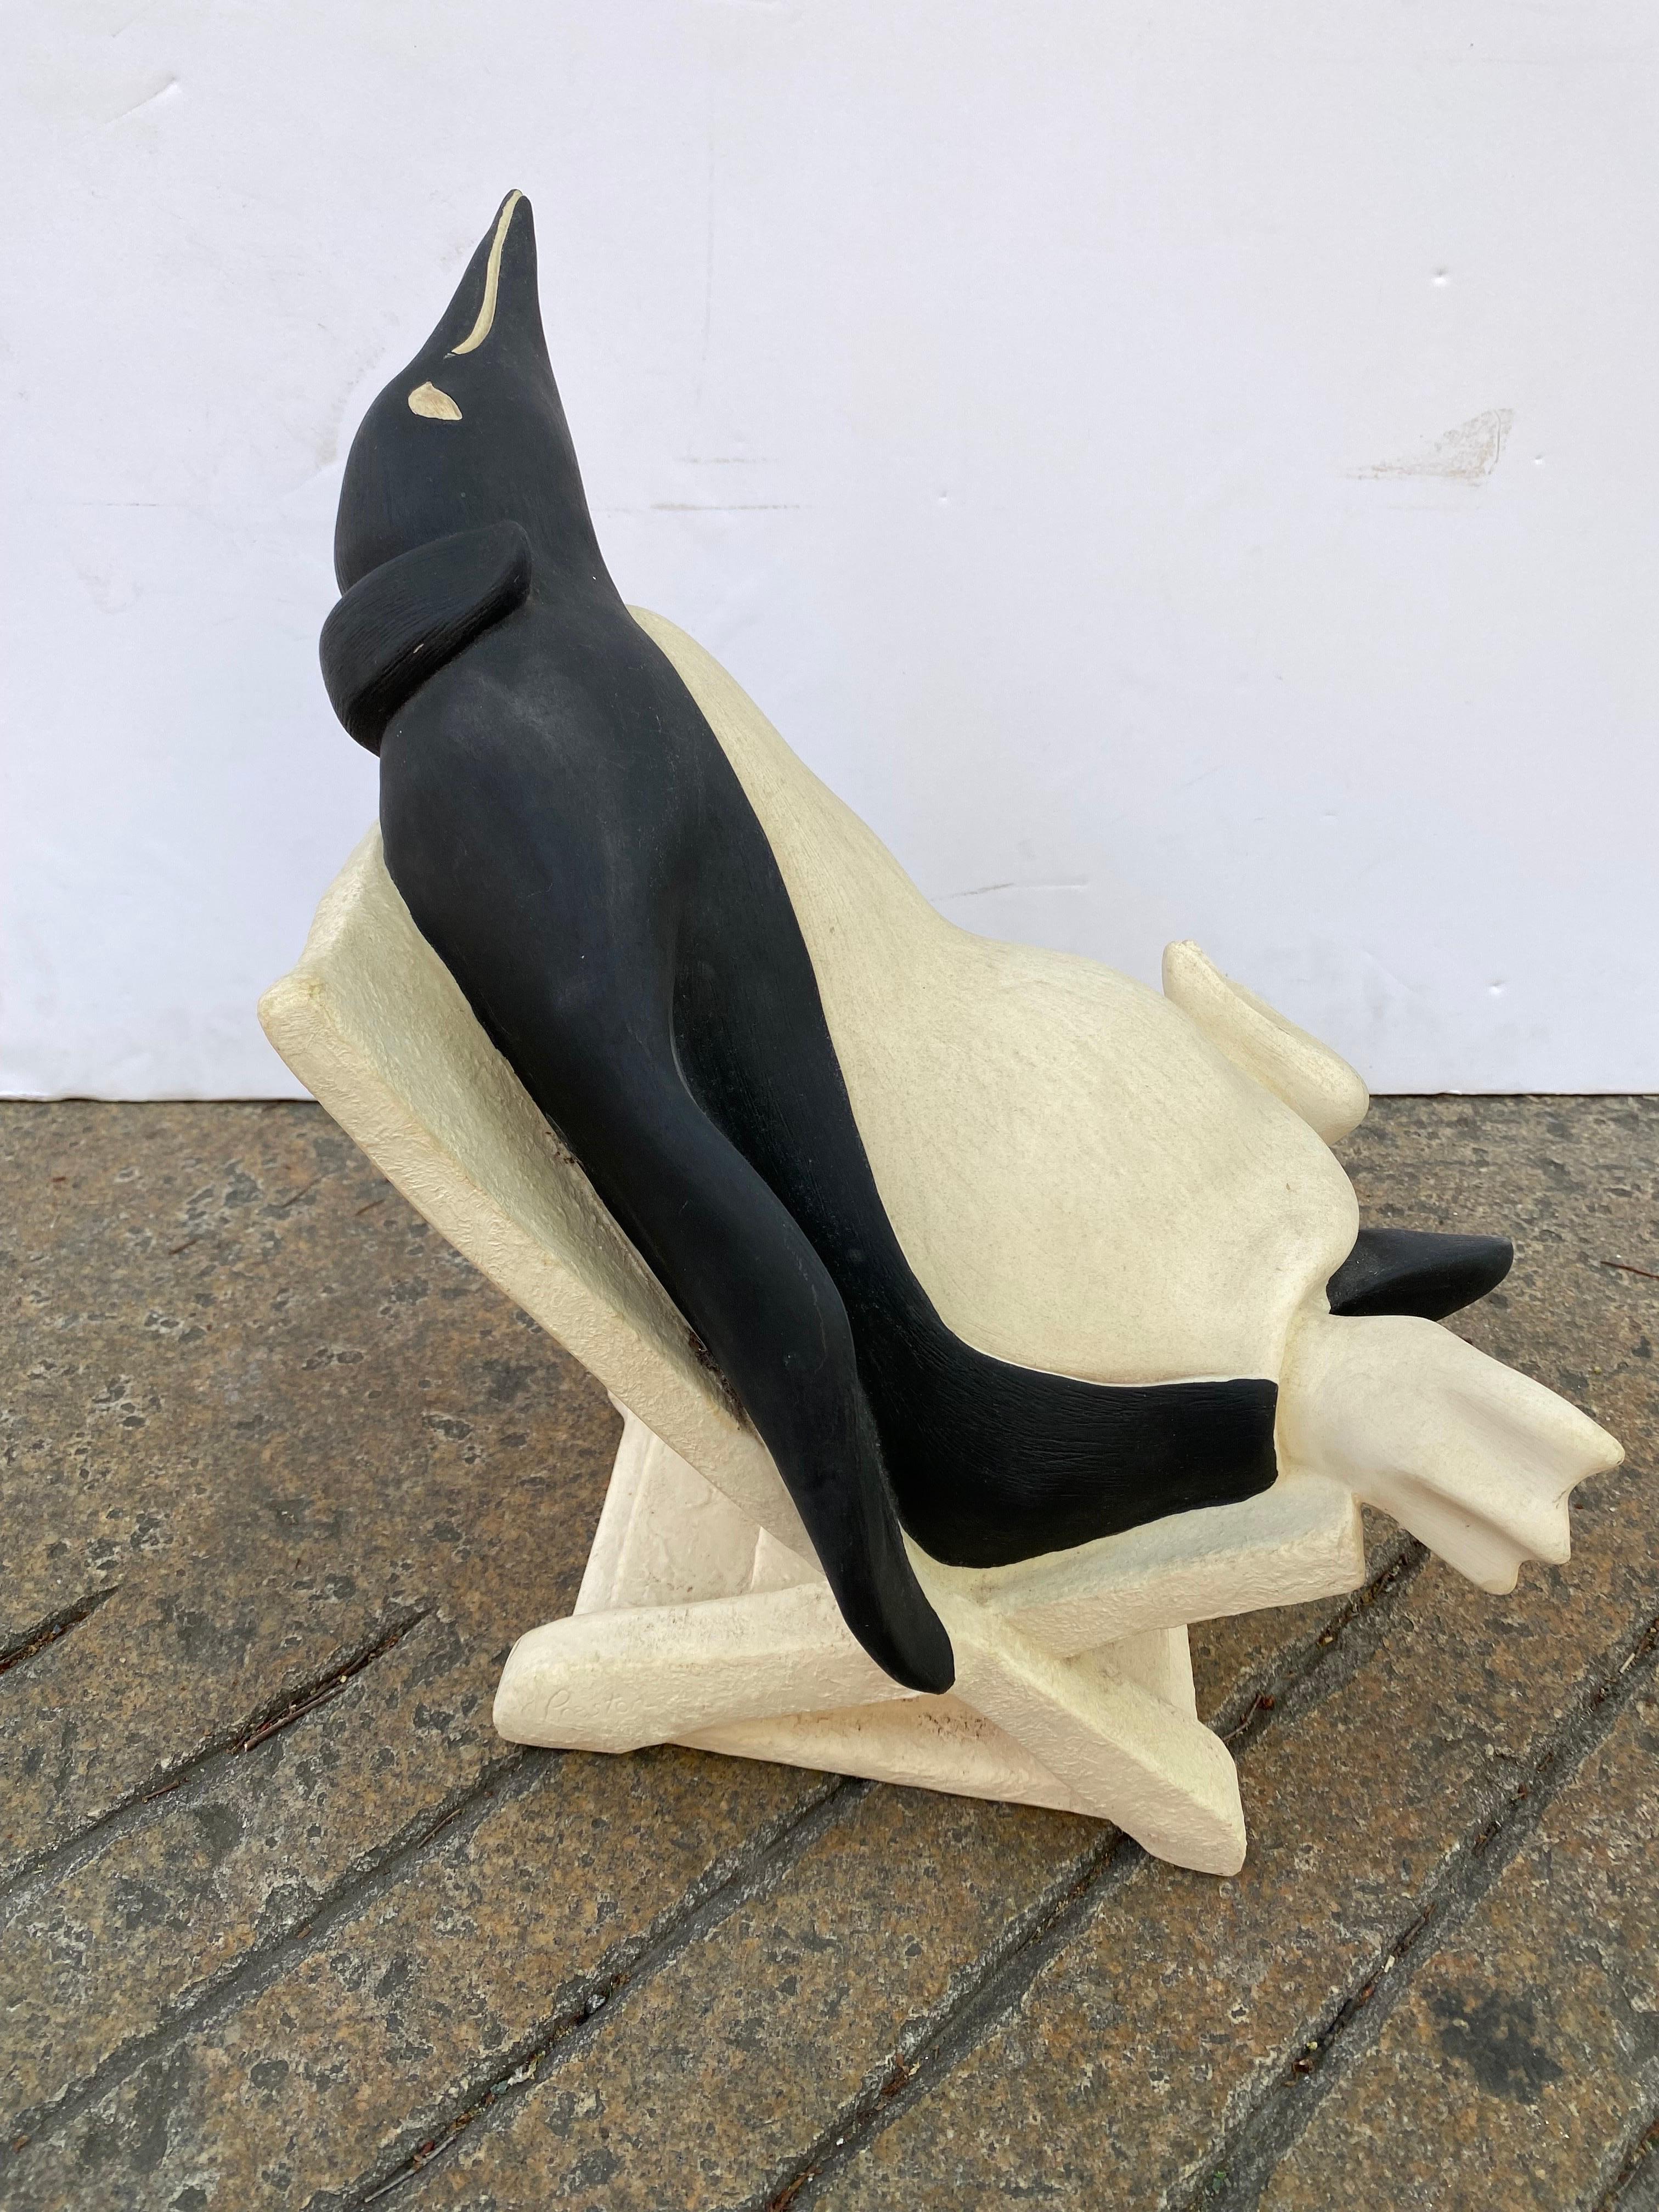 Reclining Penguin sitting on a deck chair. Signed Turner Sculpture 1991. In nice shape! Fun Whimsical Design!